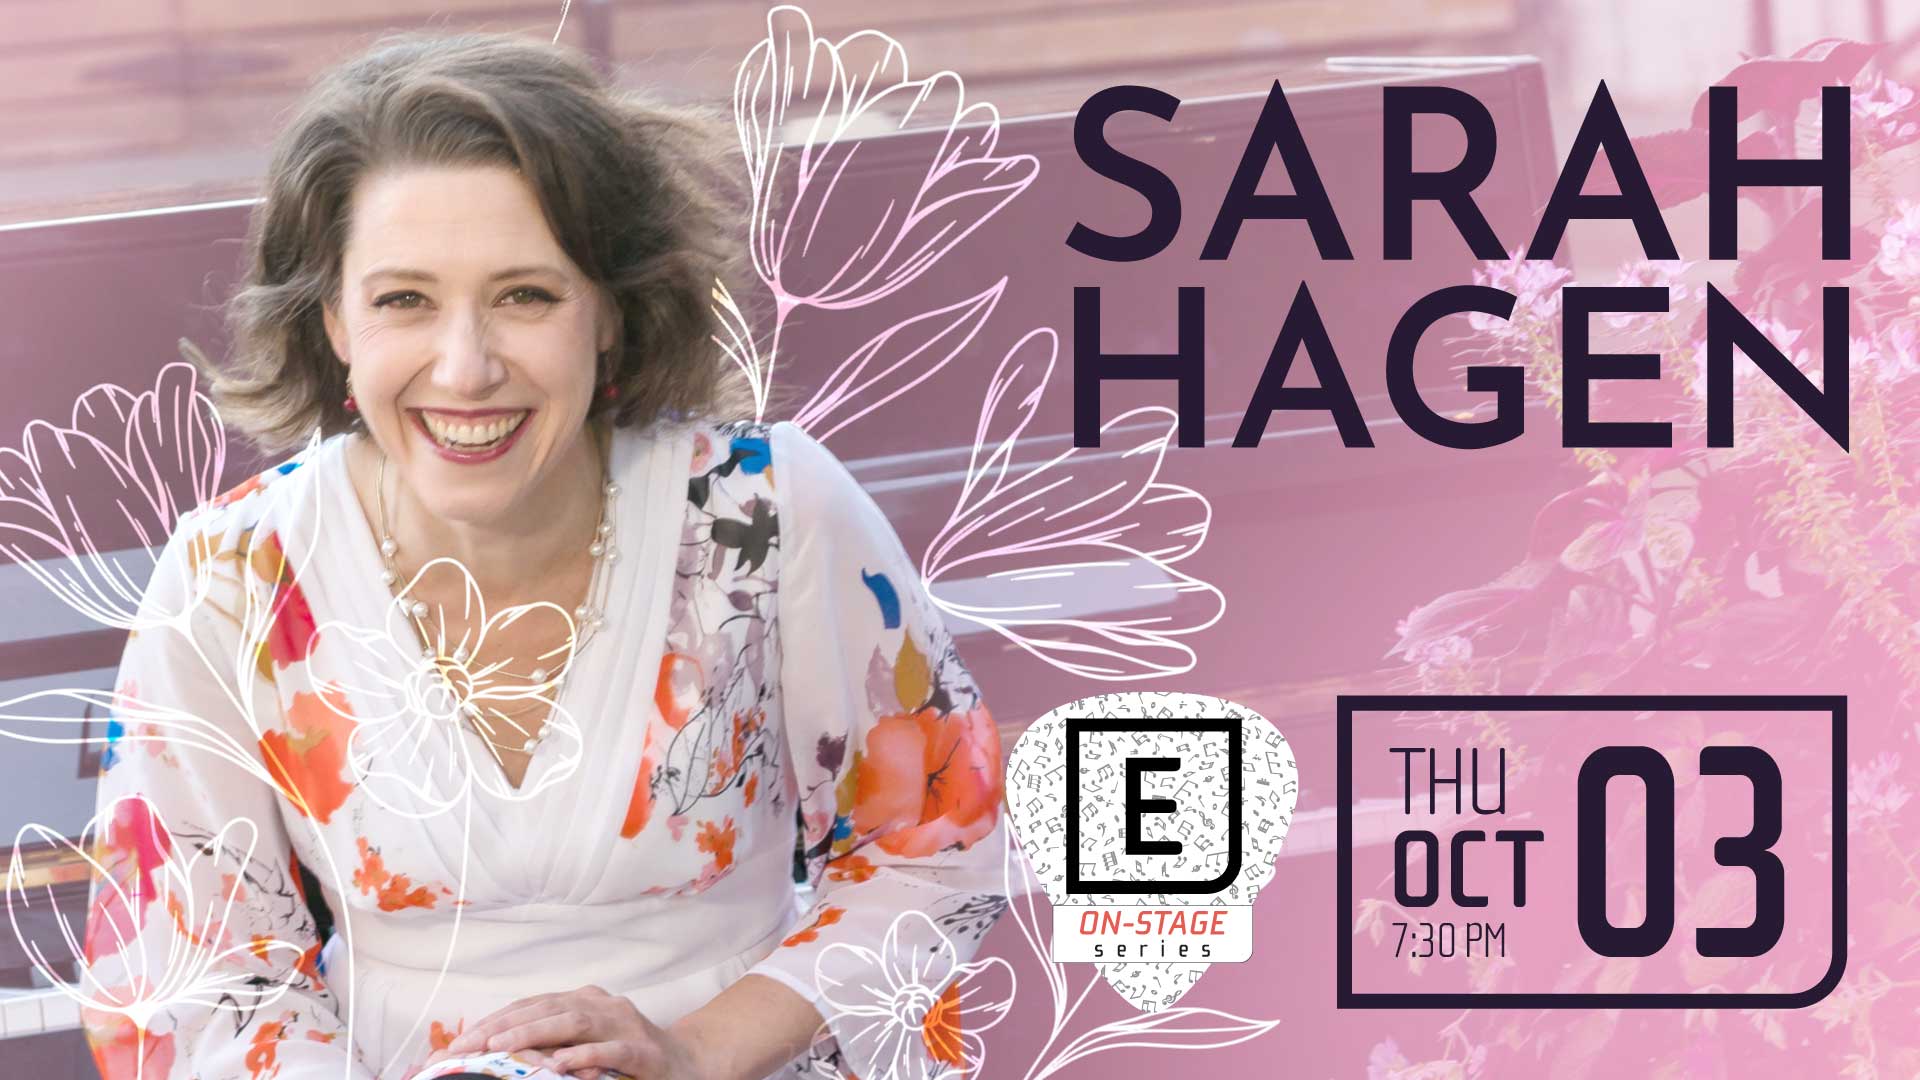 On-Stage Series with Sarah Hagen